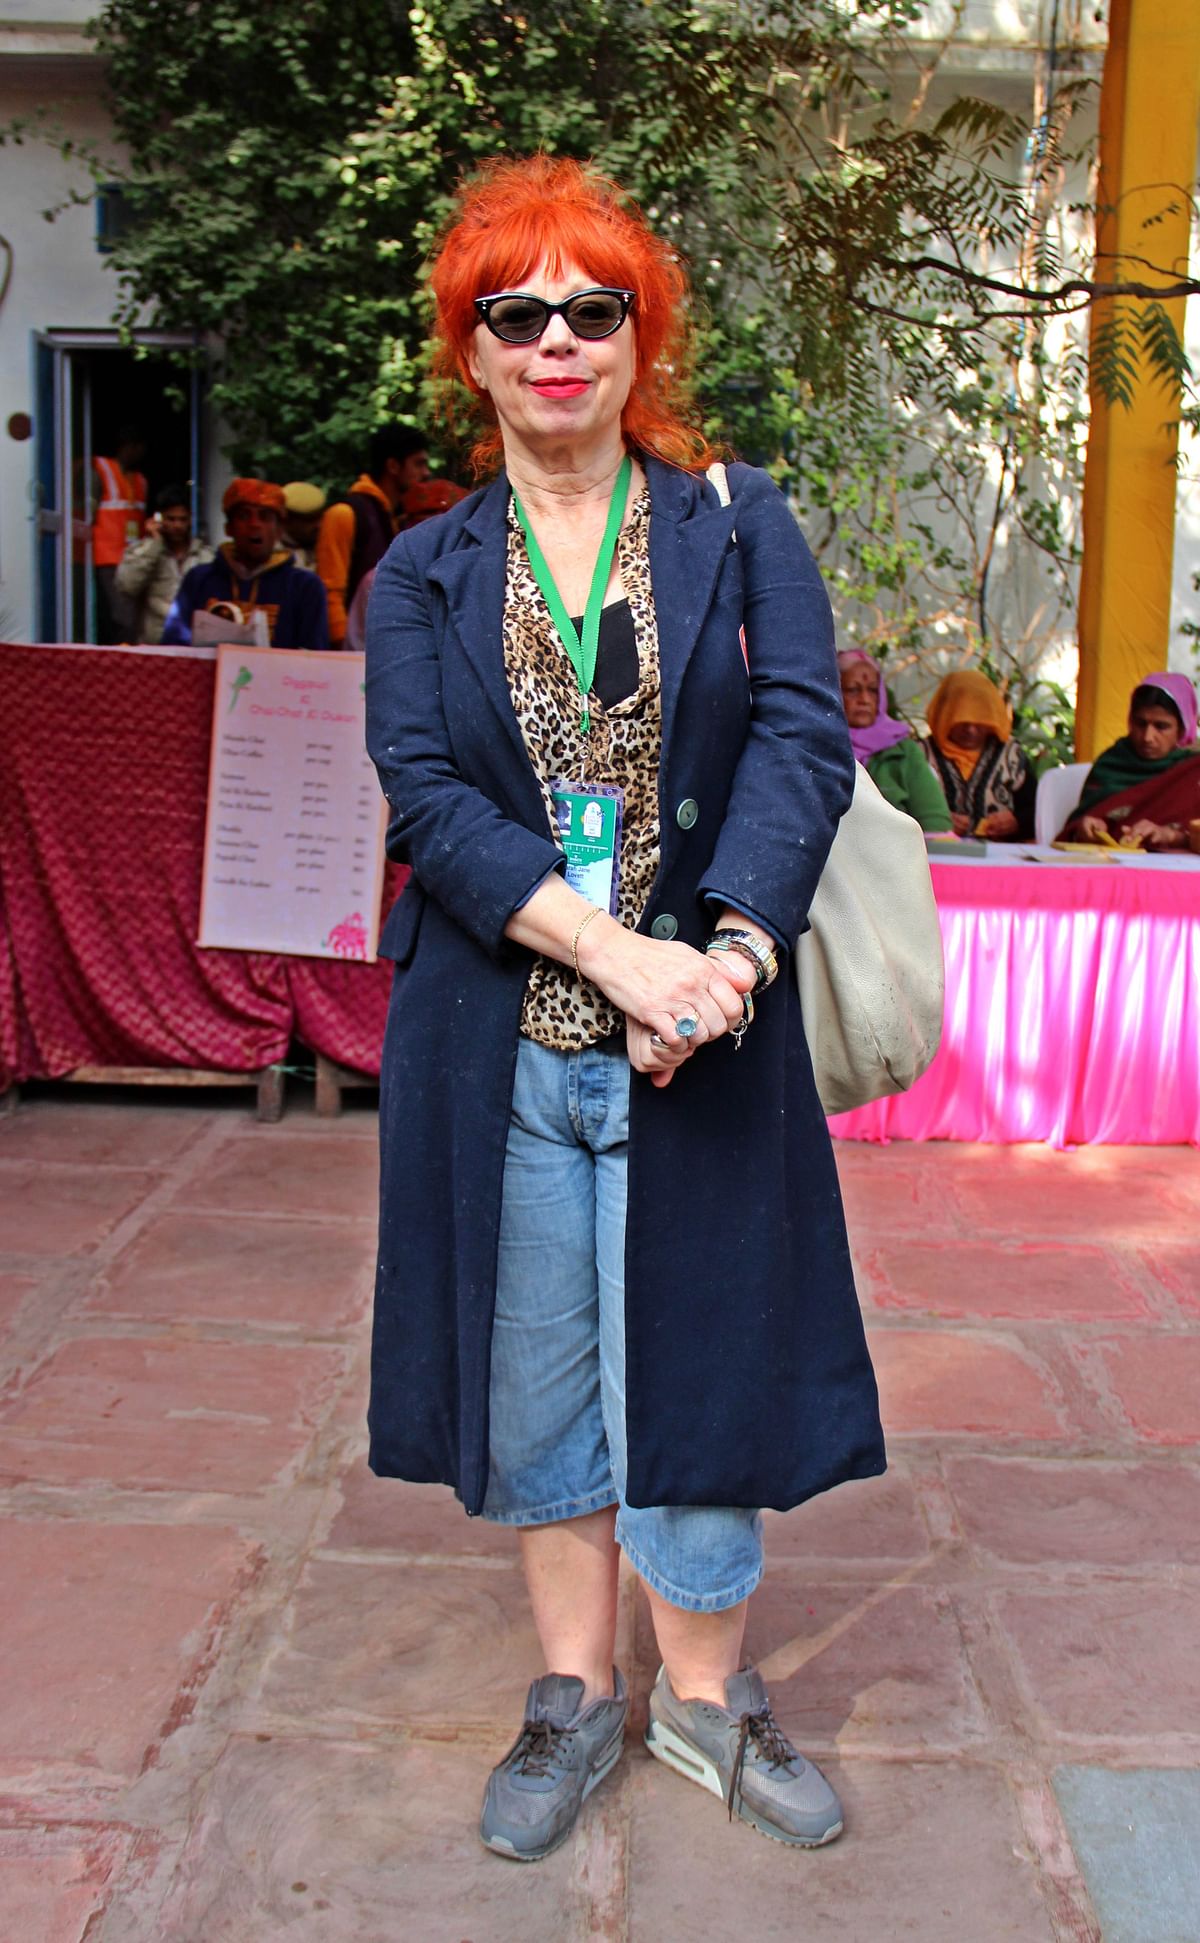 Jaipur Lit Fest isn’t just about the publishing glitterati – it’s also about the fashion! 